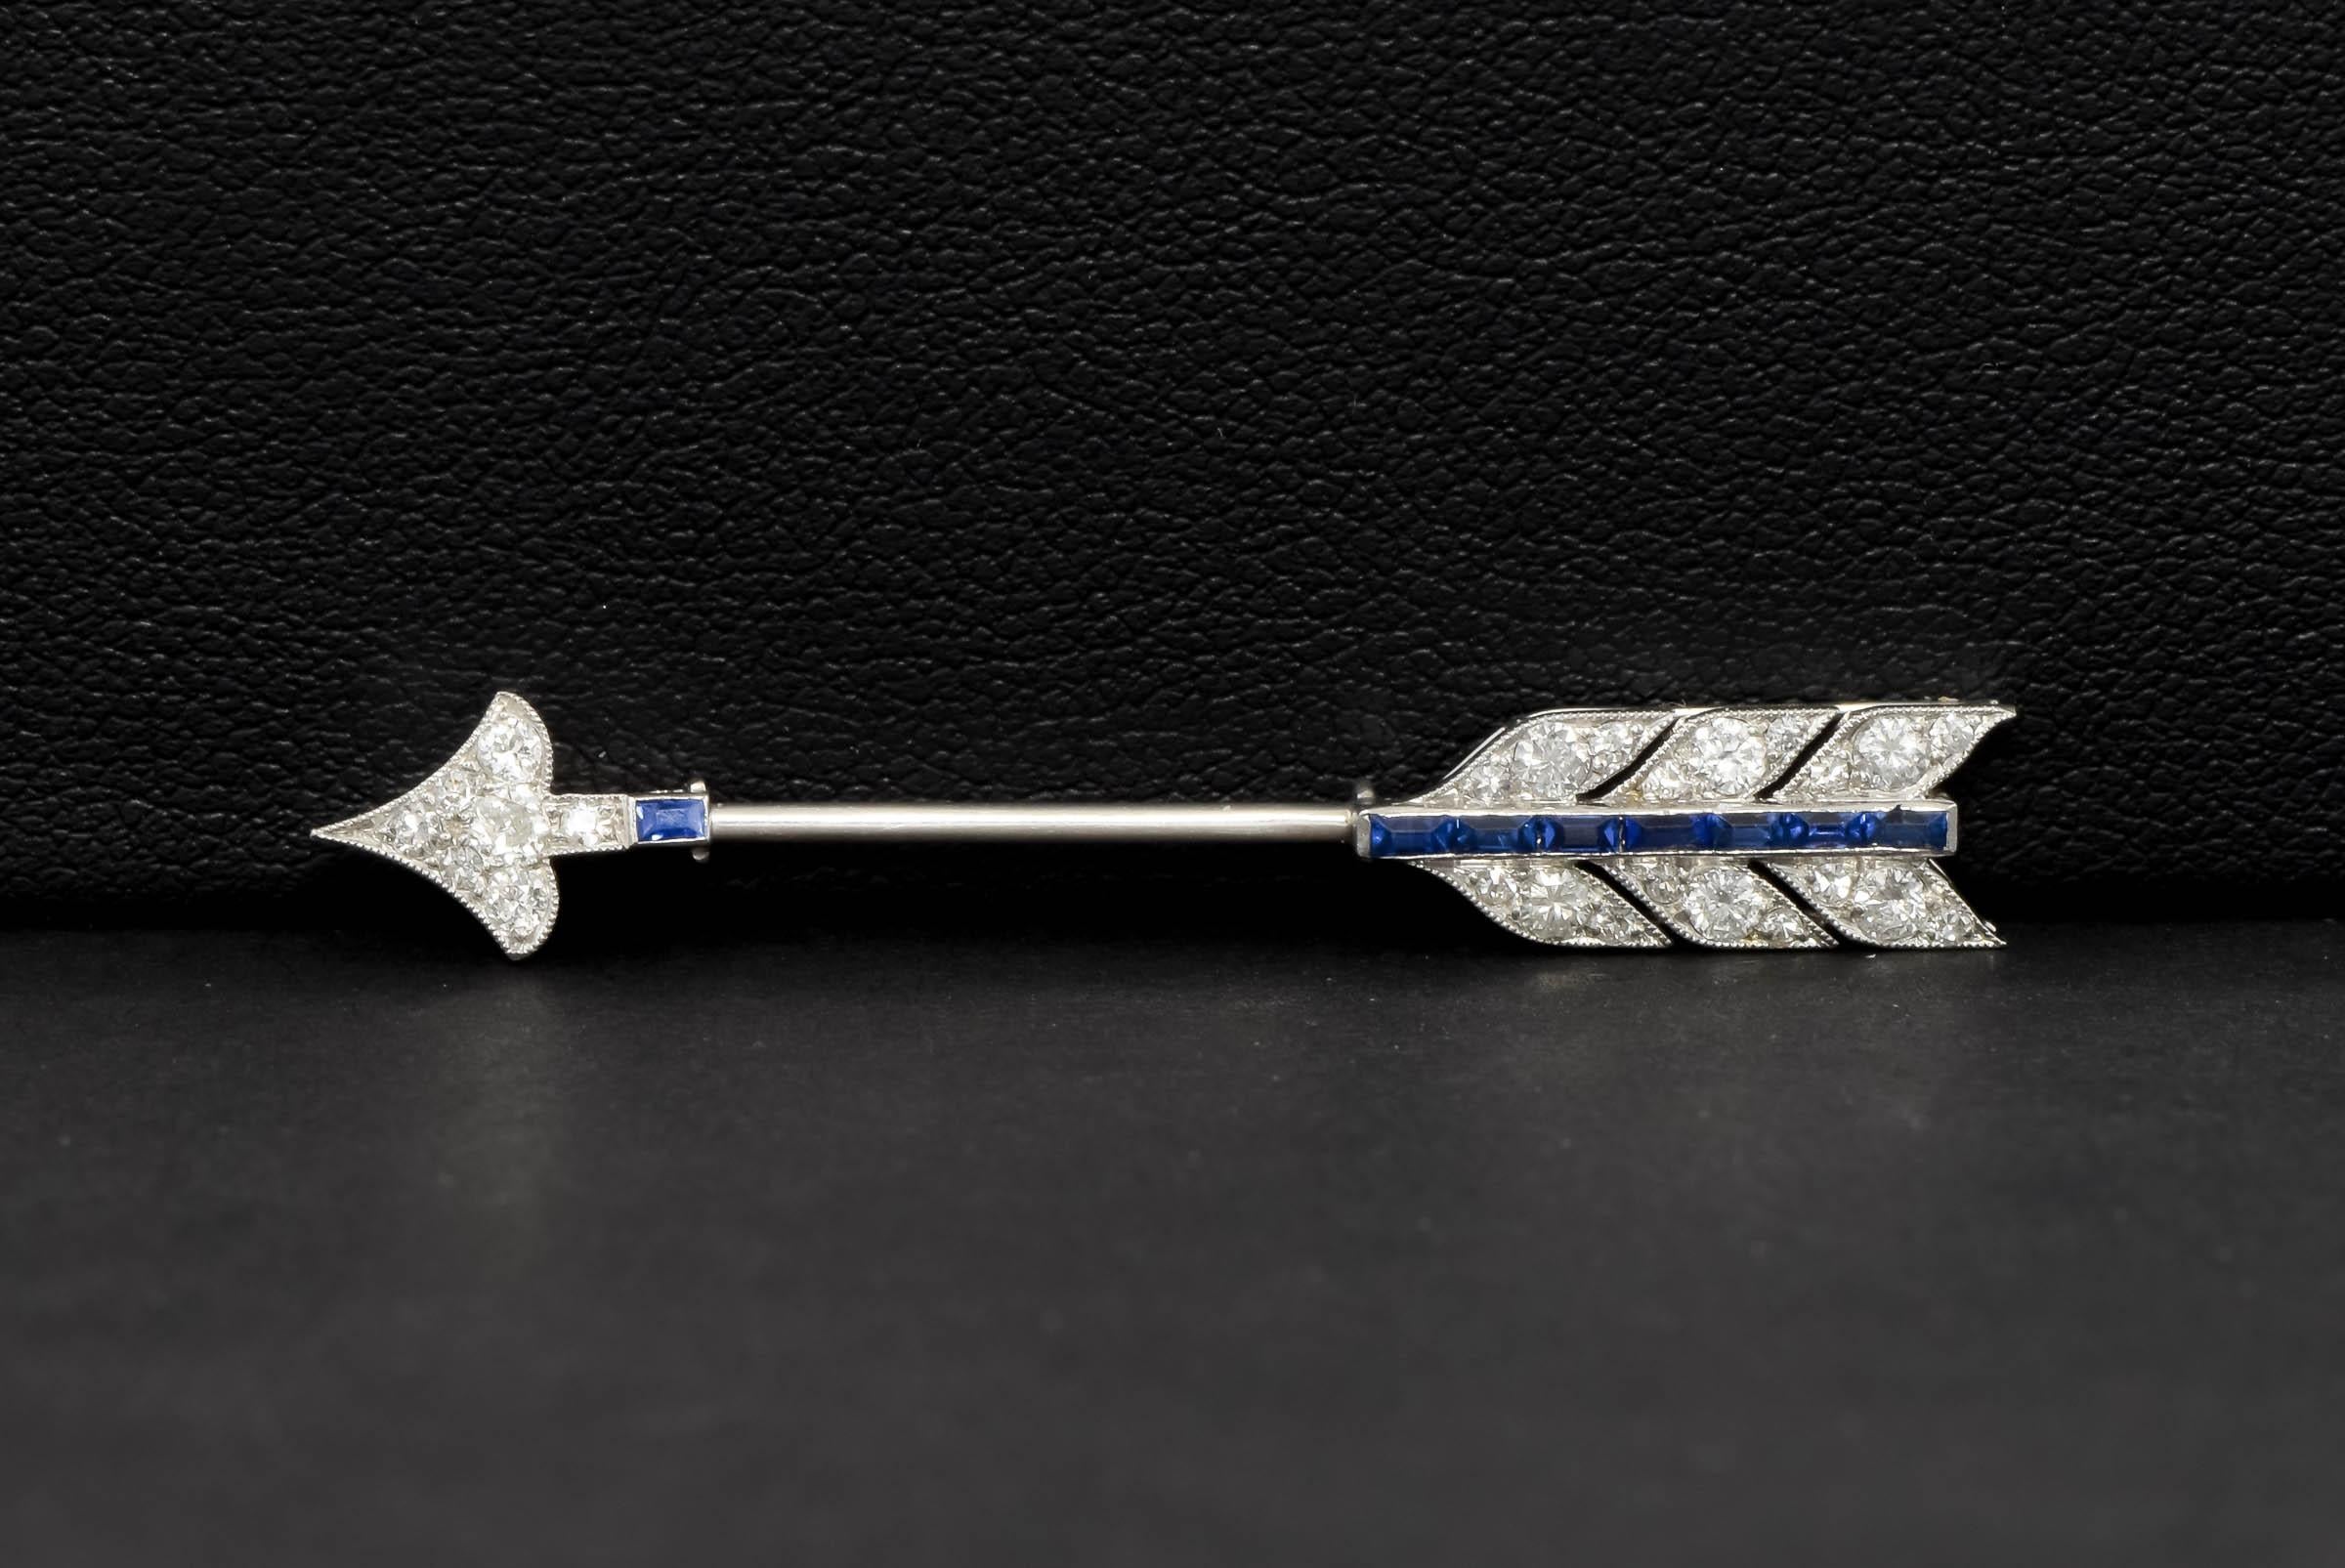 Crafted of platinum, this exquisite 1930’s Cartier  jabot pin brooch features 25 super white and fiery diamonds and 8 marvelously blue sapphires in a graceful, classic Art Deco arrow design. I estimate the diamond weight at approximately .45 carats